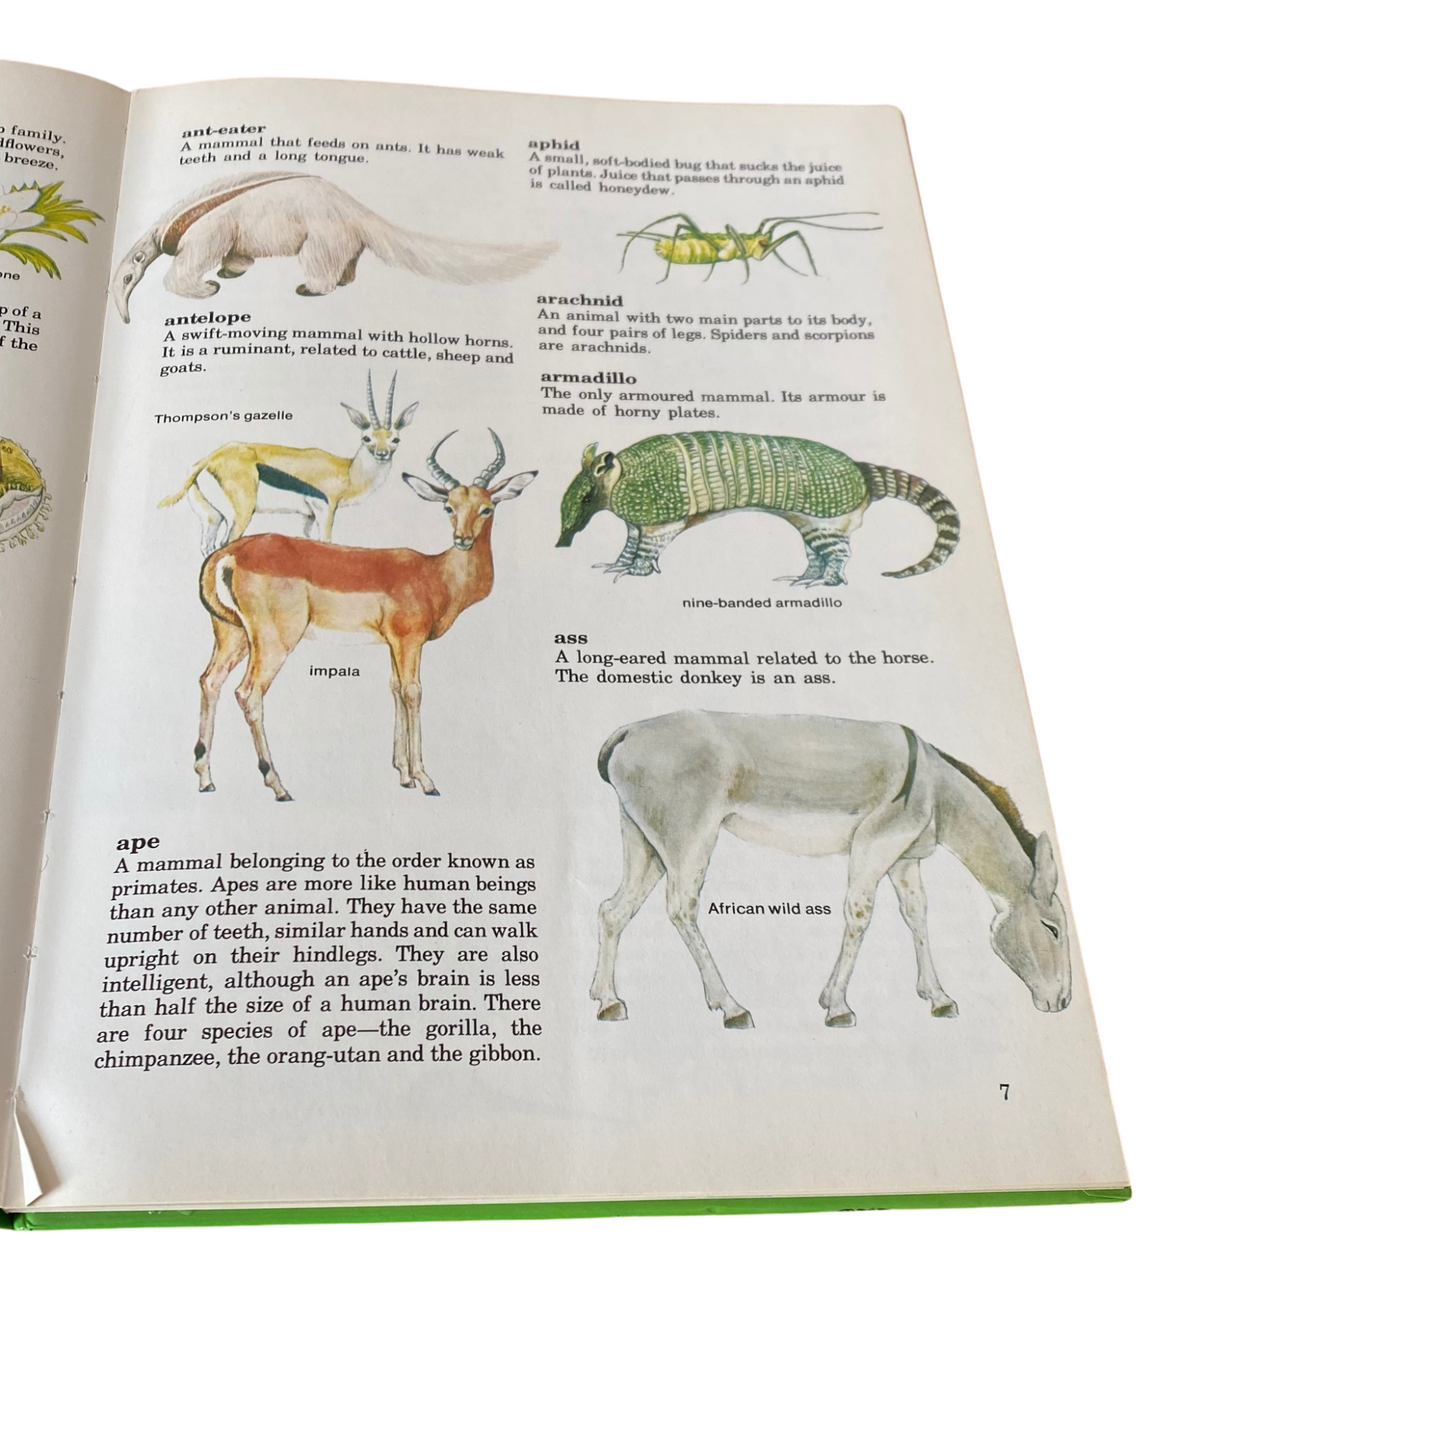 Vintage picture book. Purnell’s Picture Dictionary of Nature, 1980. Great gift idea. Beautiful illustrations.